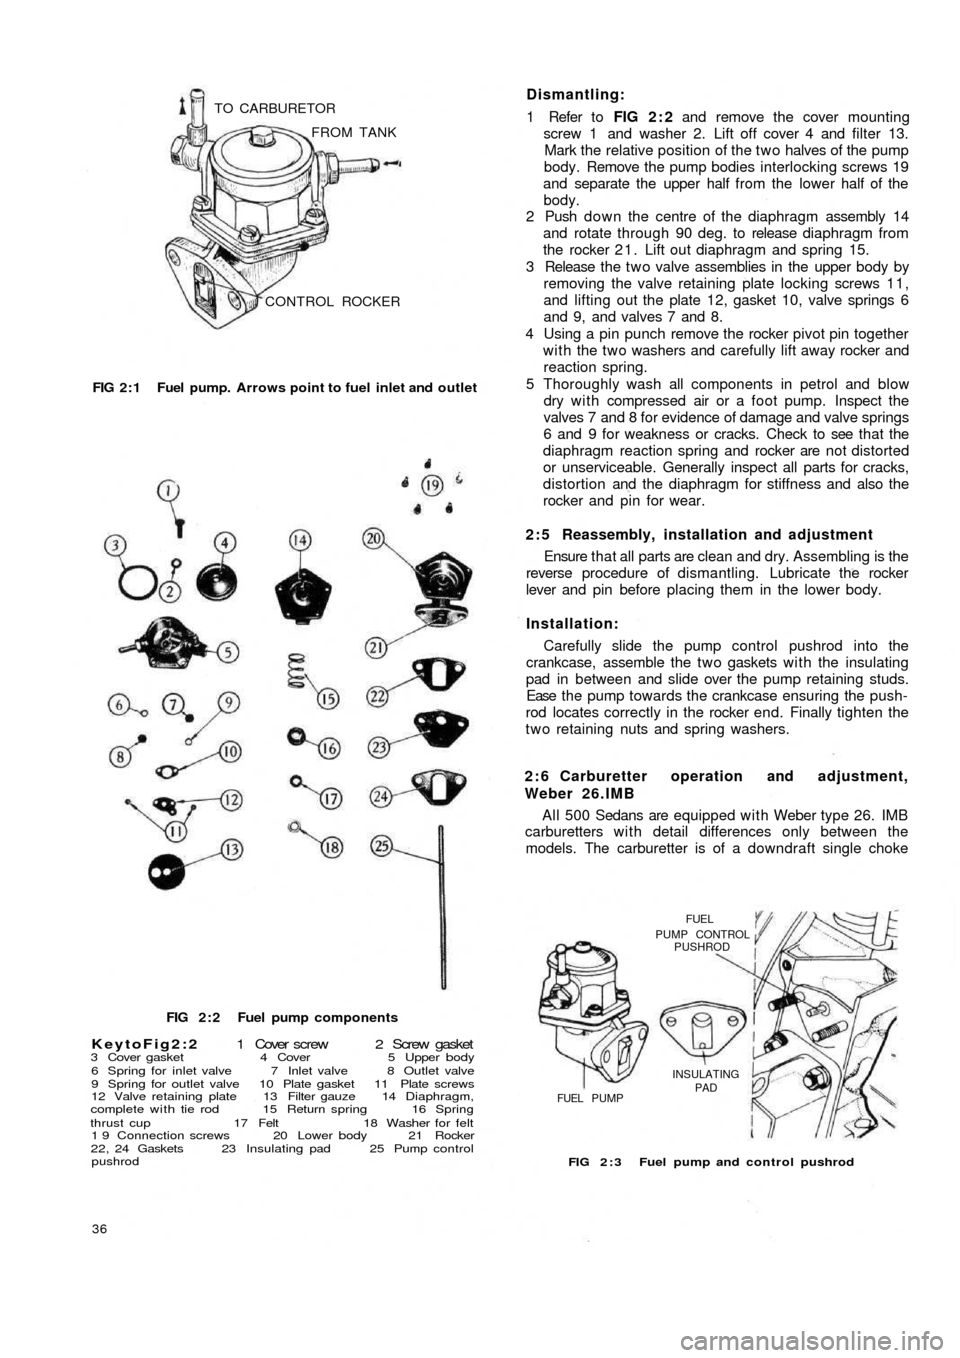 FIAT 500 1960 1.G Workshop Manual CONTROL ROCKER FROM TANK TO CARBURETOR
FIG 2 : 1  Fuel pump. Arrows point to fuel  inlet and outlet
FIG 2 : 2  Fuel pump components
KeytoFig2:2 1  Cover  screw  2  Screw  gasket3 Cover gasket 4 Cover 